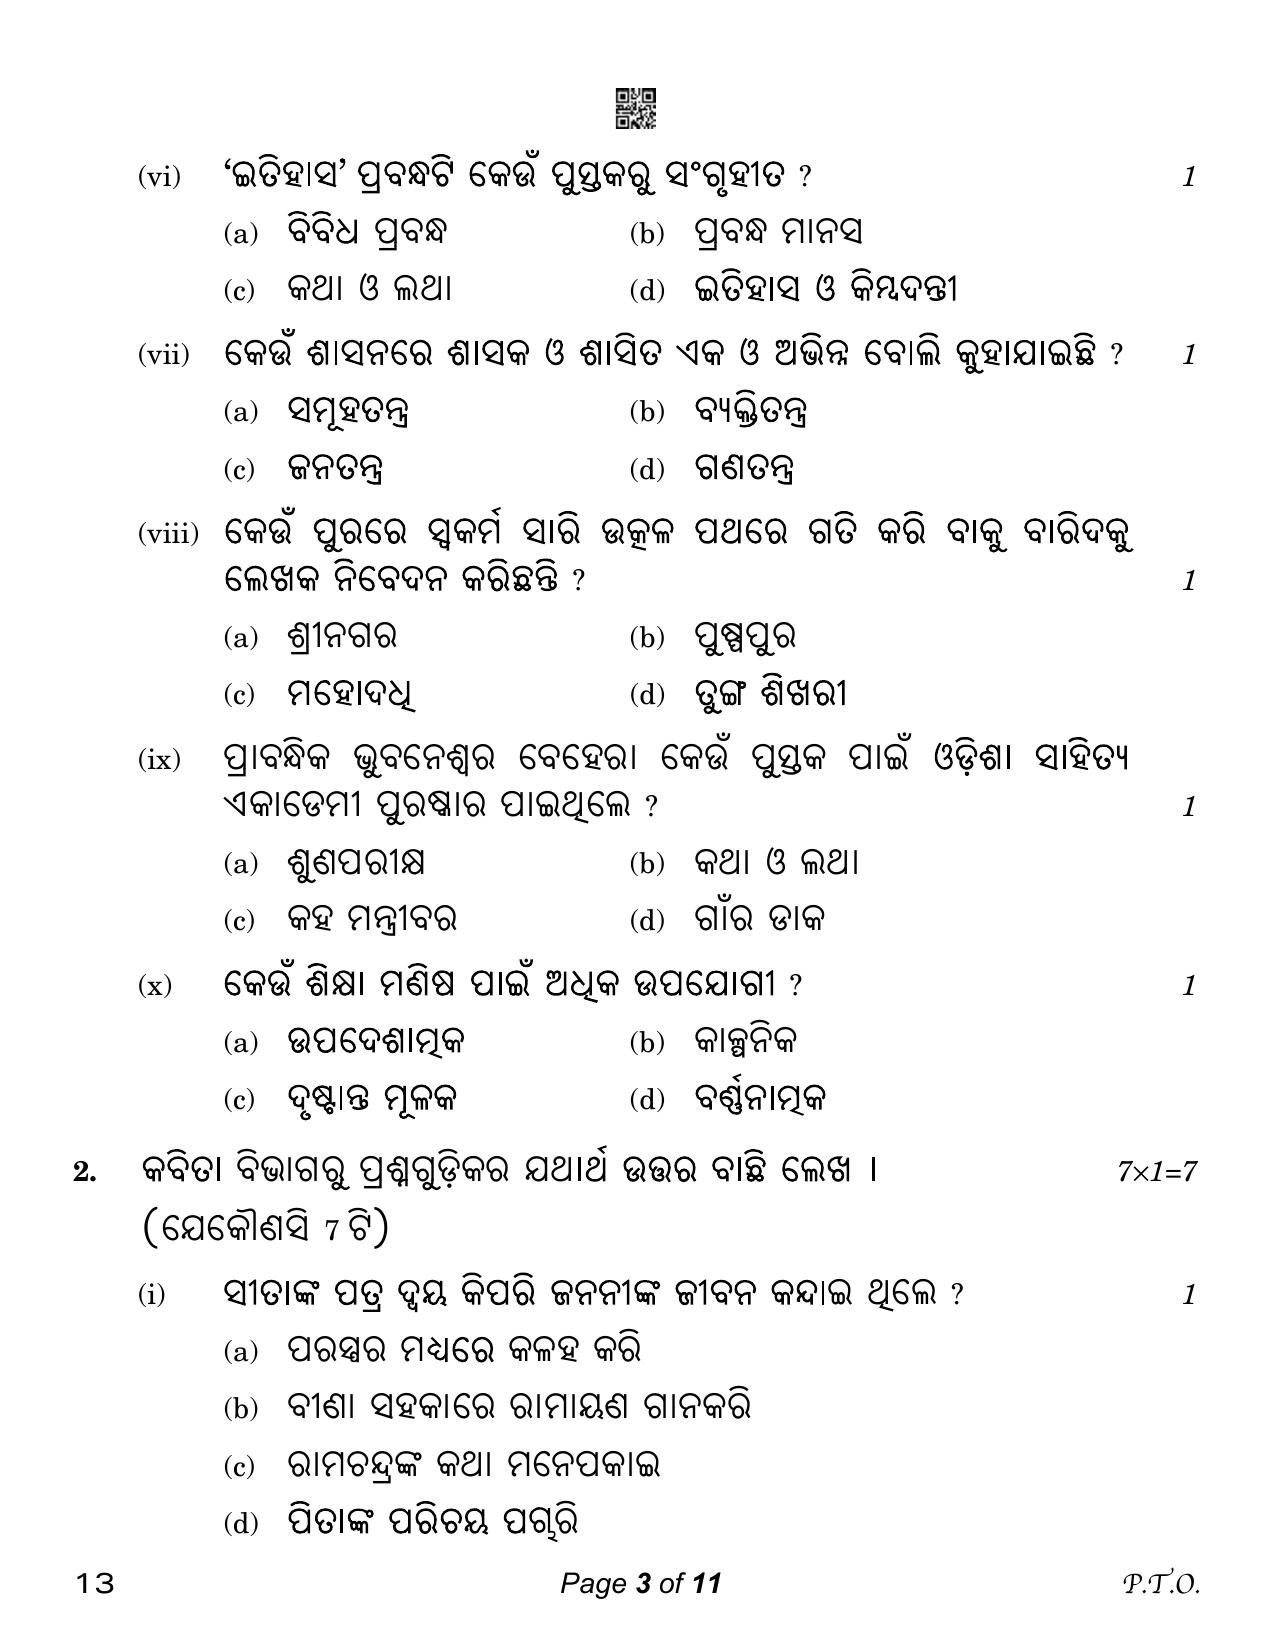 CBSE Class 12 Odia (Compartment) 2023 Question Paper - Page 3